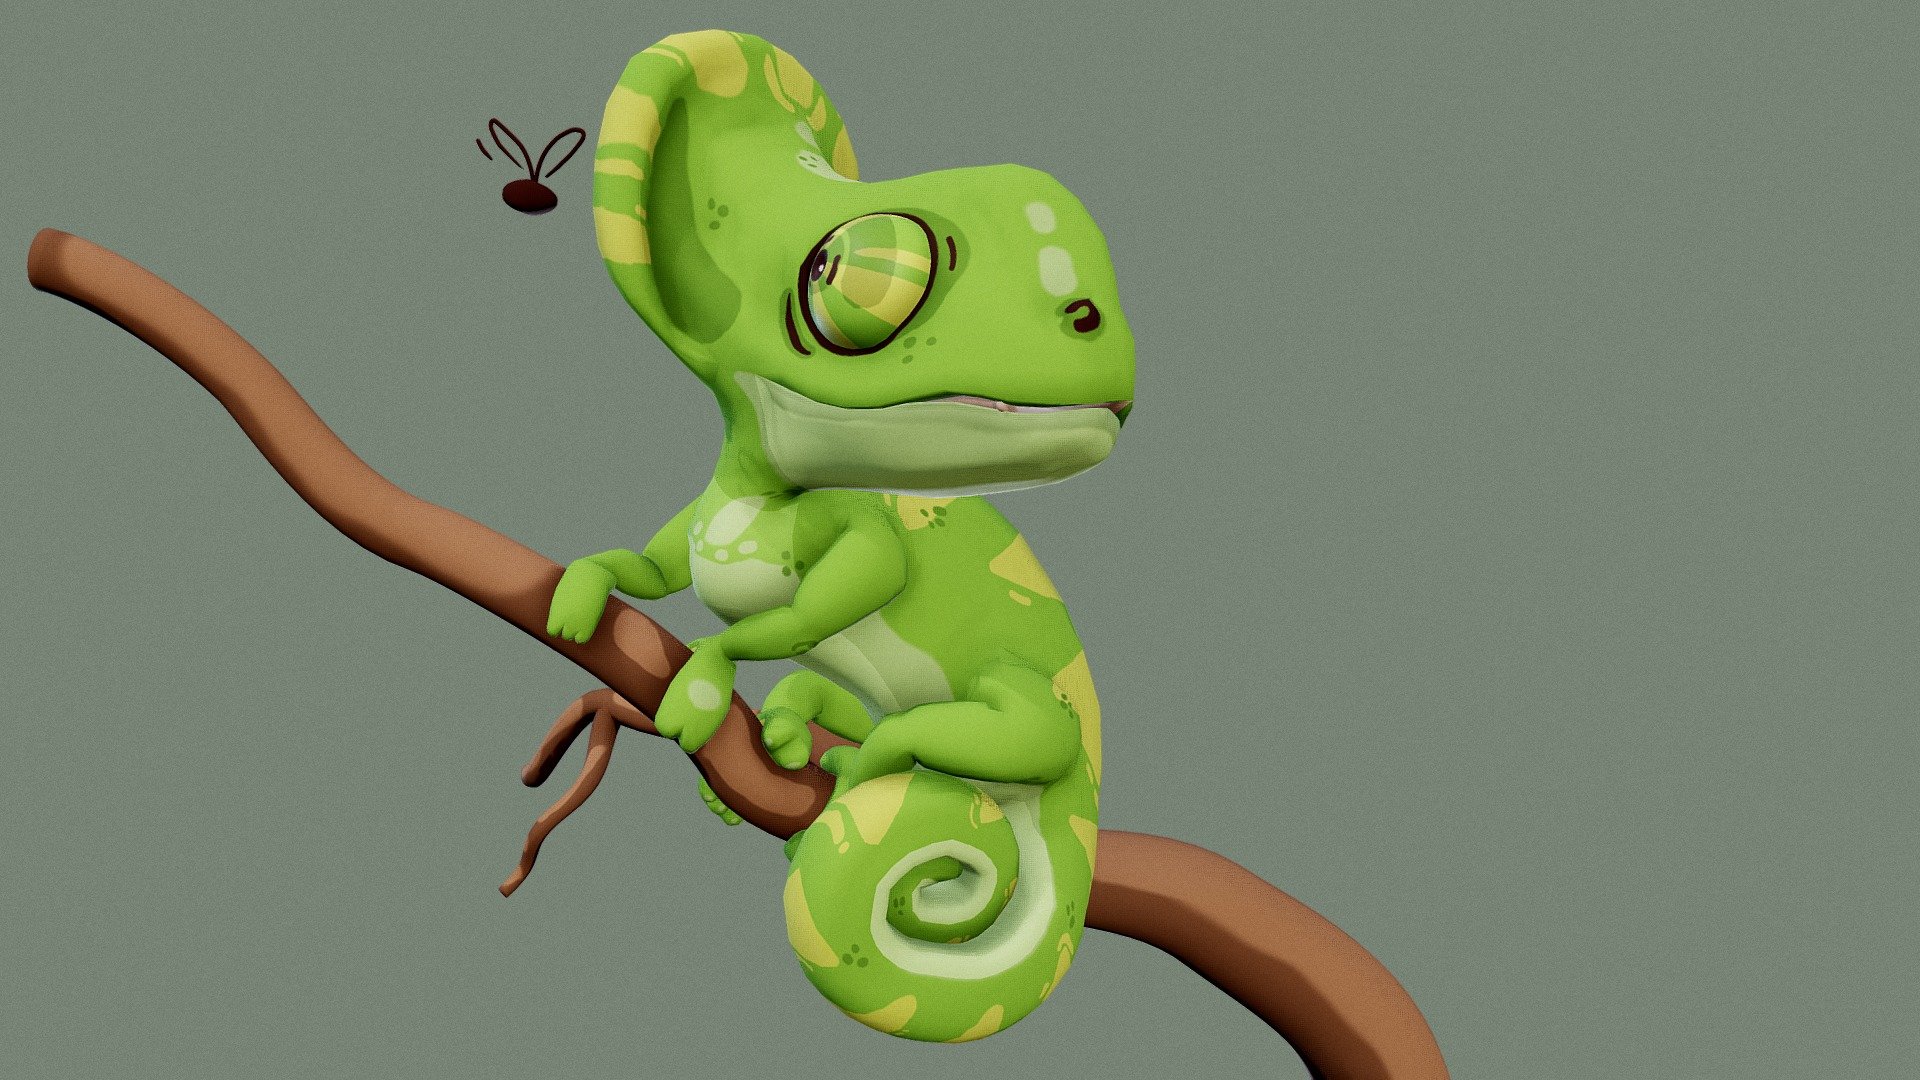 A funny cartoon chameleon.
All models and textures made in Blender. 
Time left ~7h.
An original autor of reference (2D art) Anastasiya Gromova (https://www.instagram.com/lt.fish.art/)
Find there more pretty cartoon animals drawings ^^.


Youtube timelapse (Model creation process): https://www.youtube.com/watch?v=sr6XoAIKnQk - Cartoon Chameleon - 3D model by Cordy 3d model